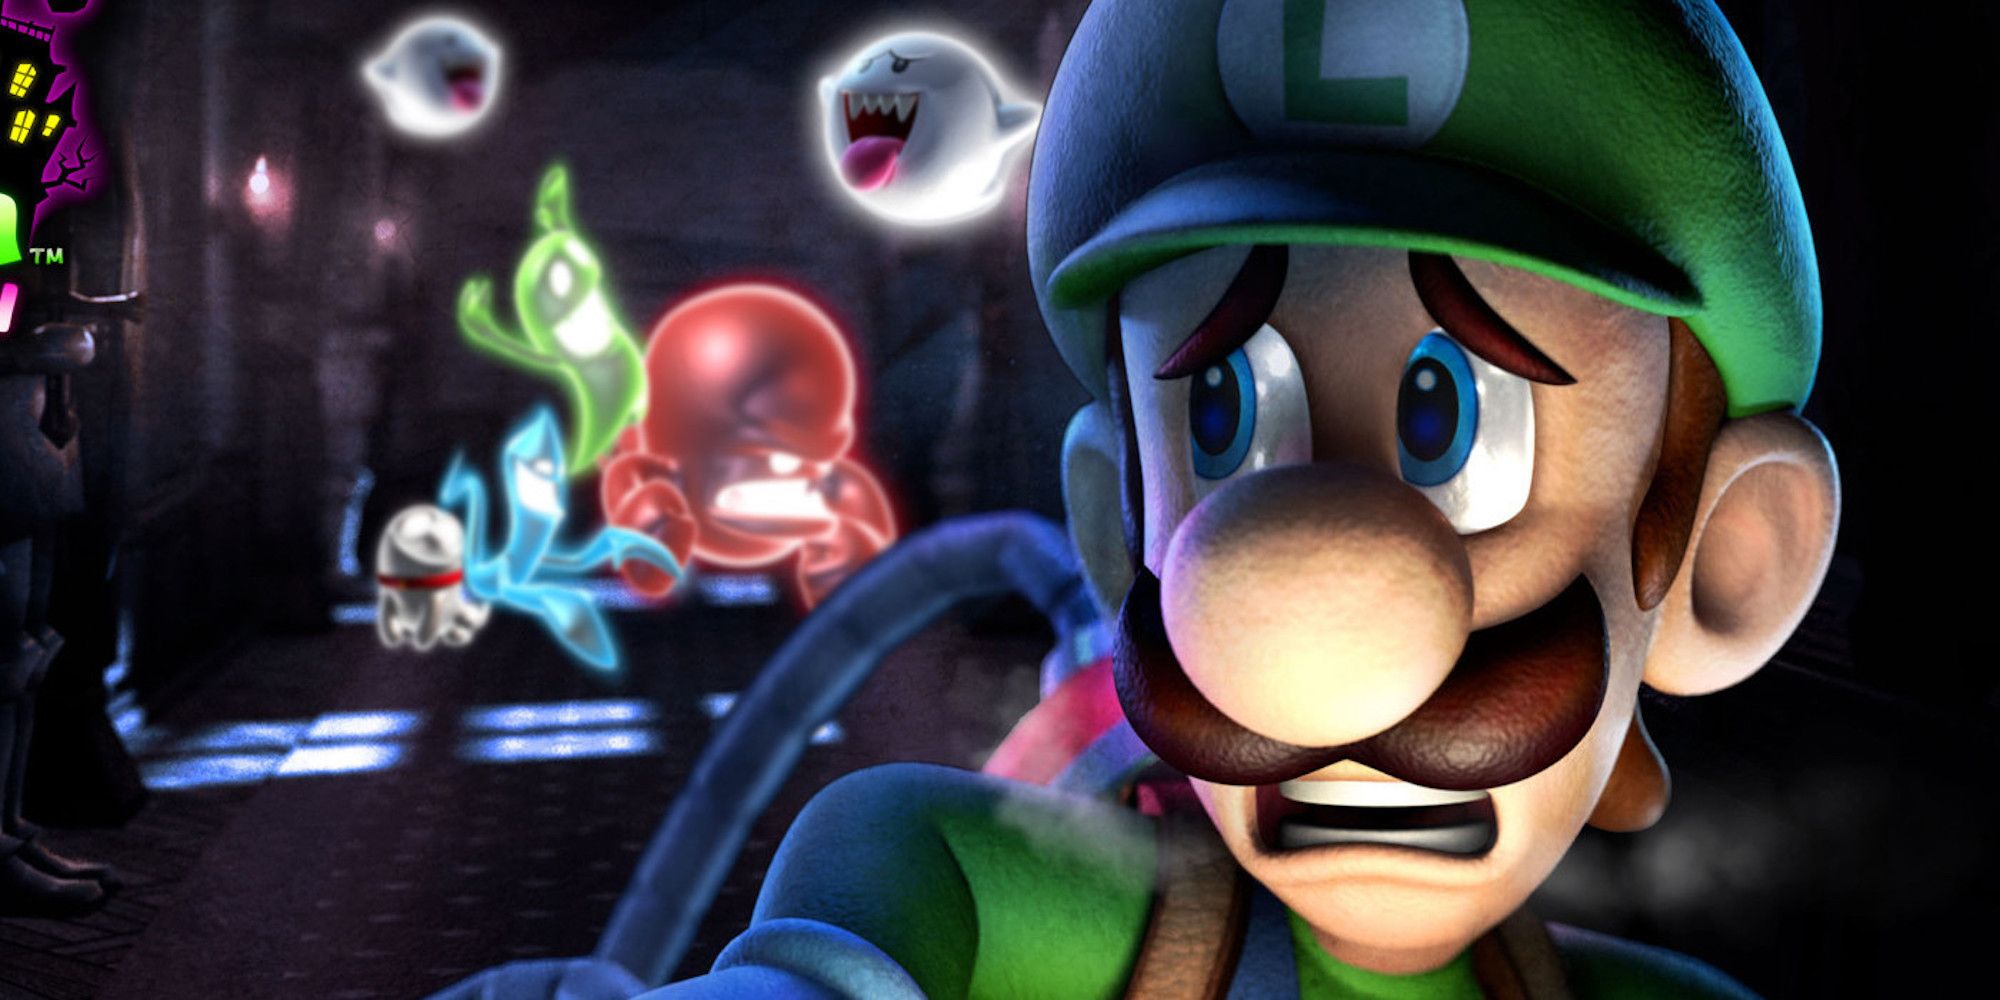 Promo art featuring characters in Luigi’s Mansion 2